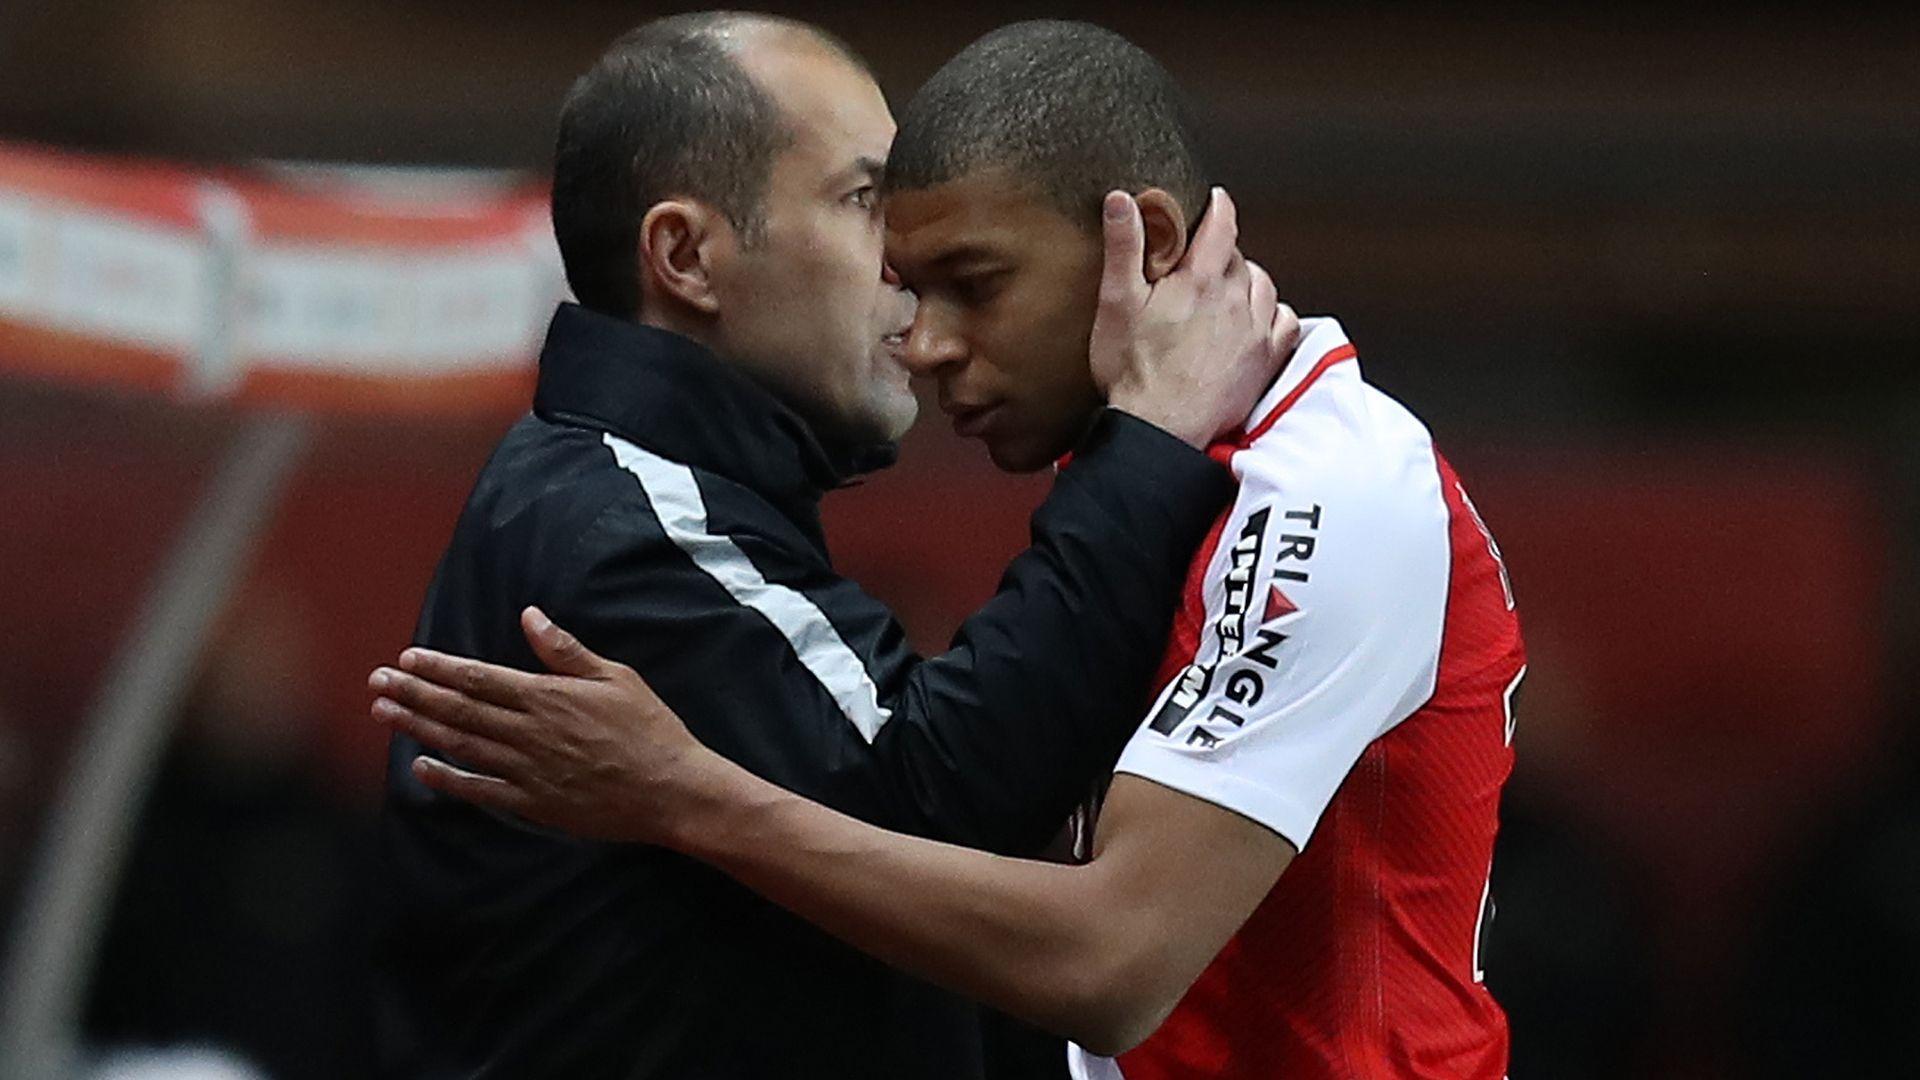 Kylian Mbappe is ahead of Thierry Henry – Remi Garde